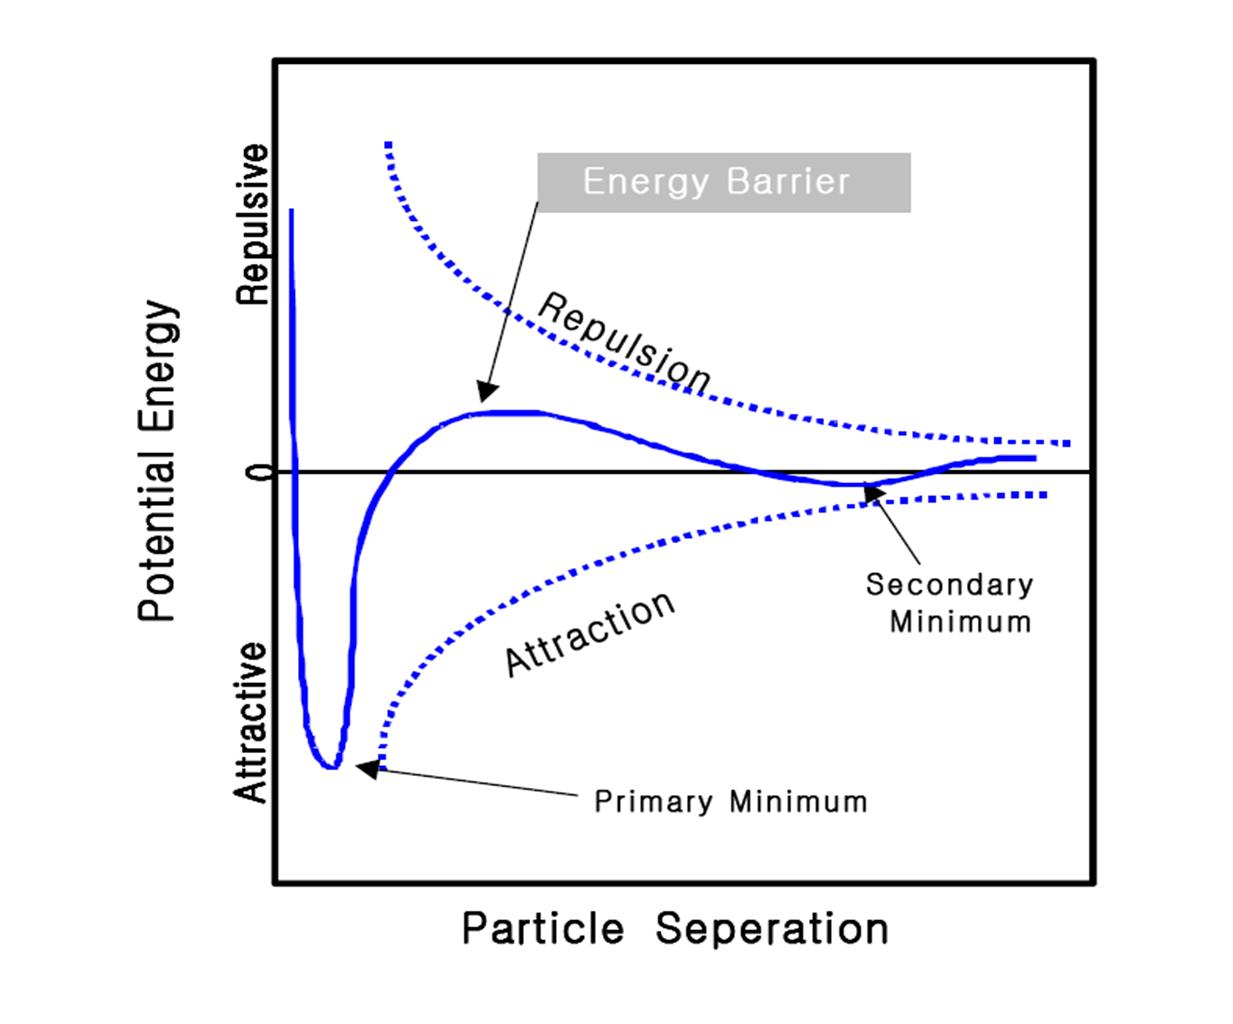 Potential energy of interaction between particles with electrical double laters. The secondary minimum is not expected when  ≪ 